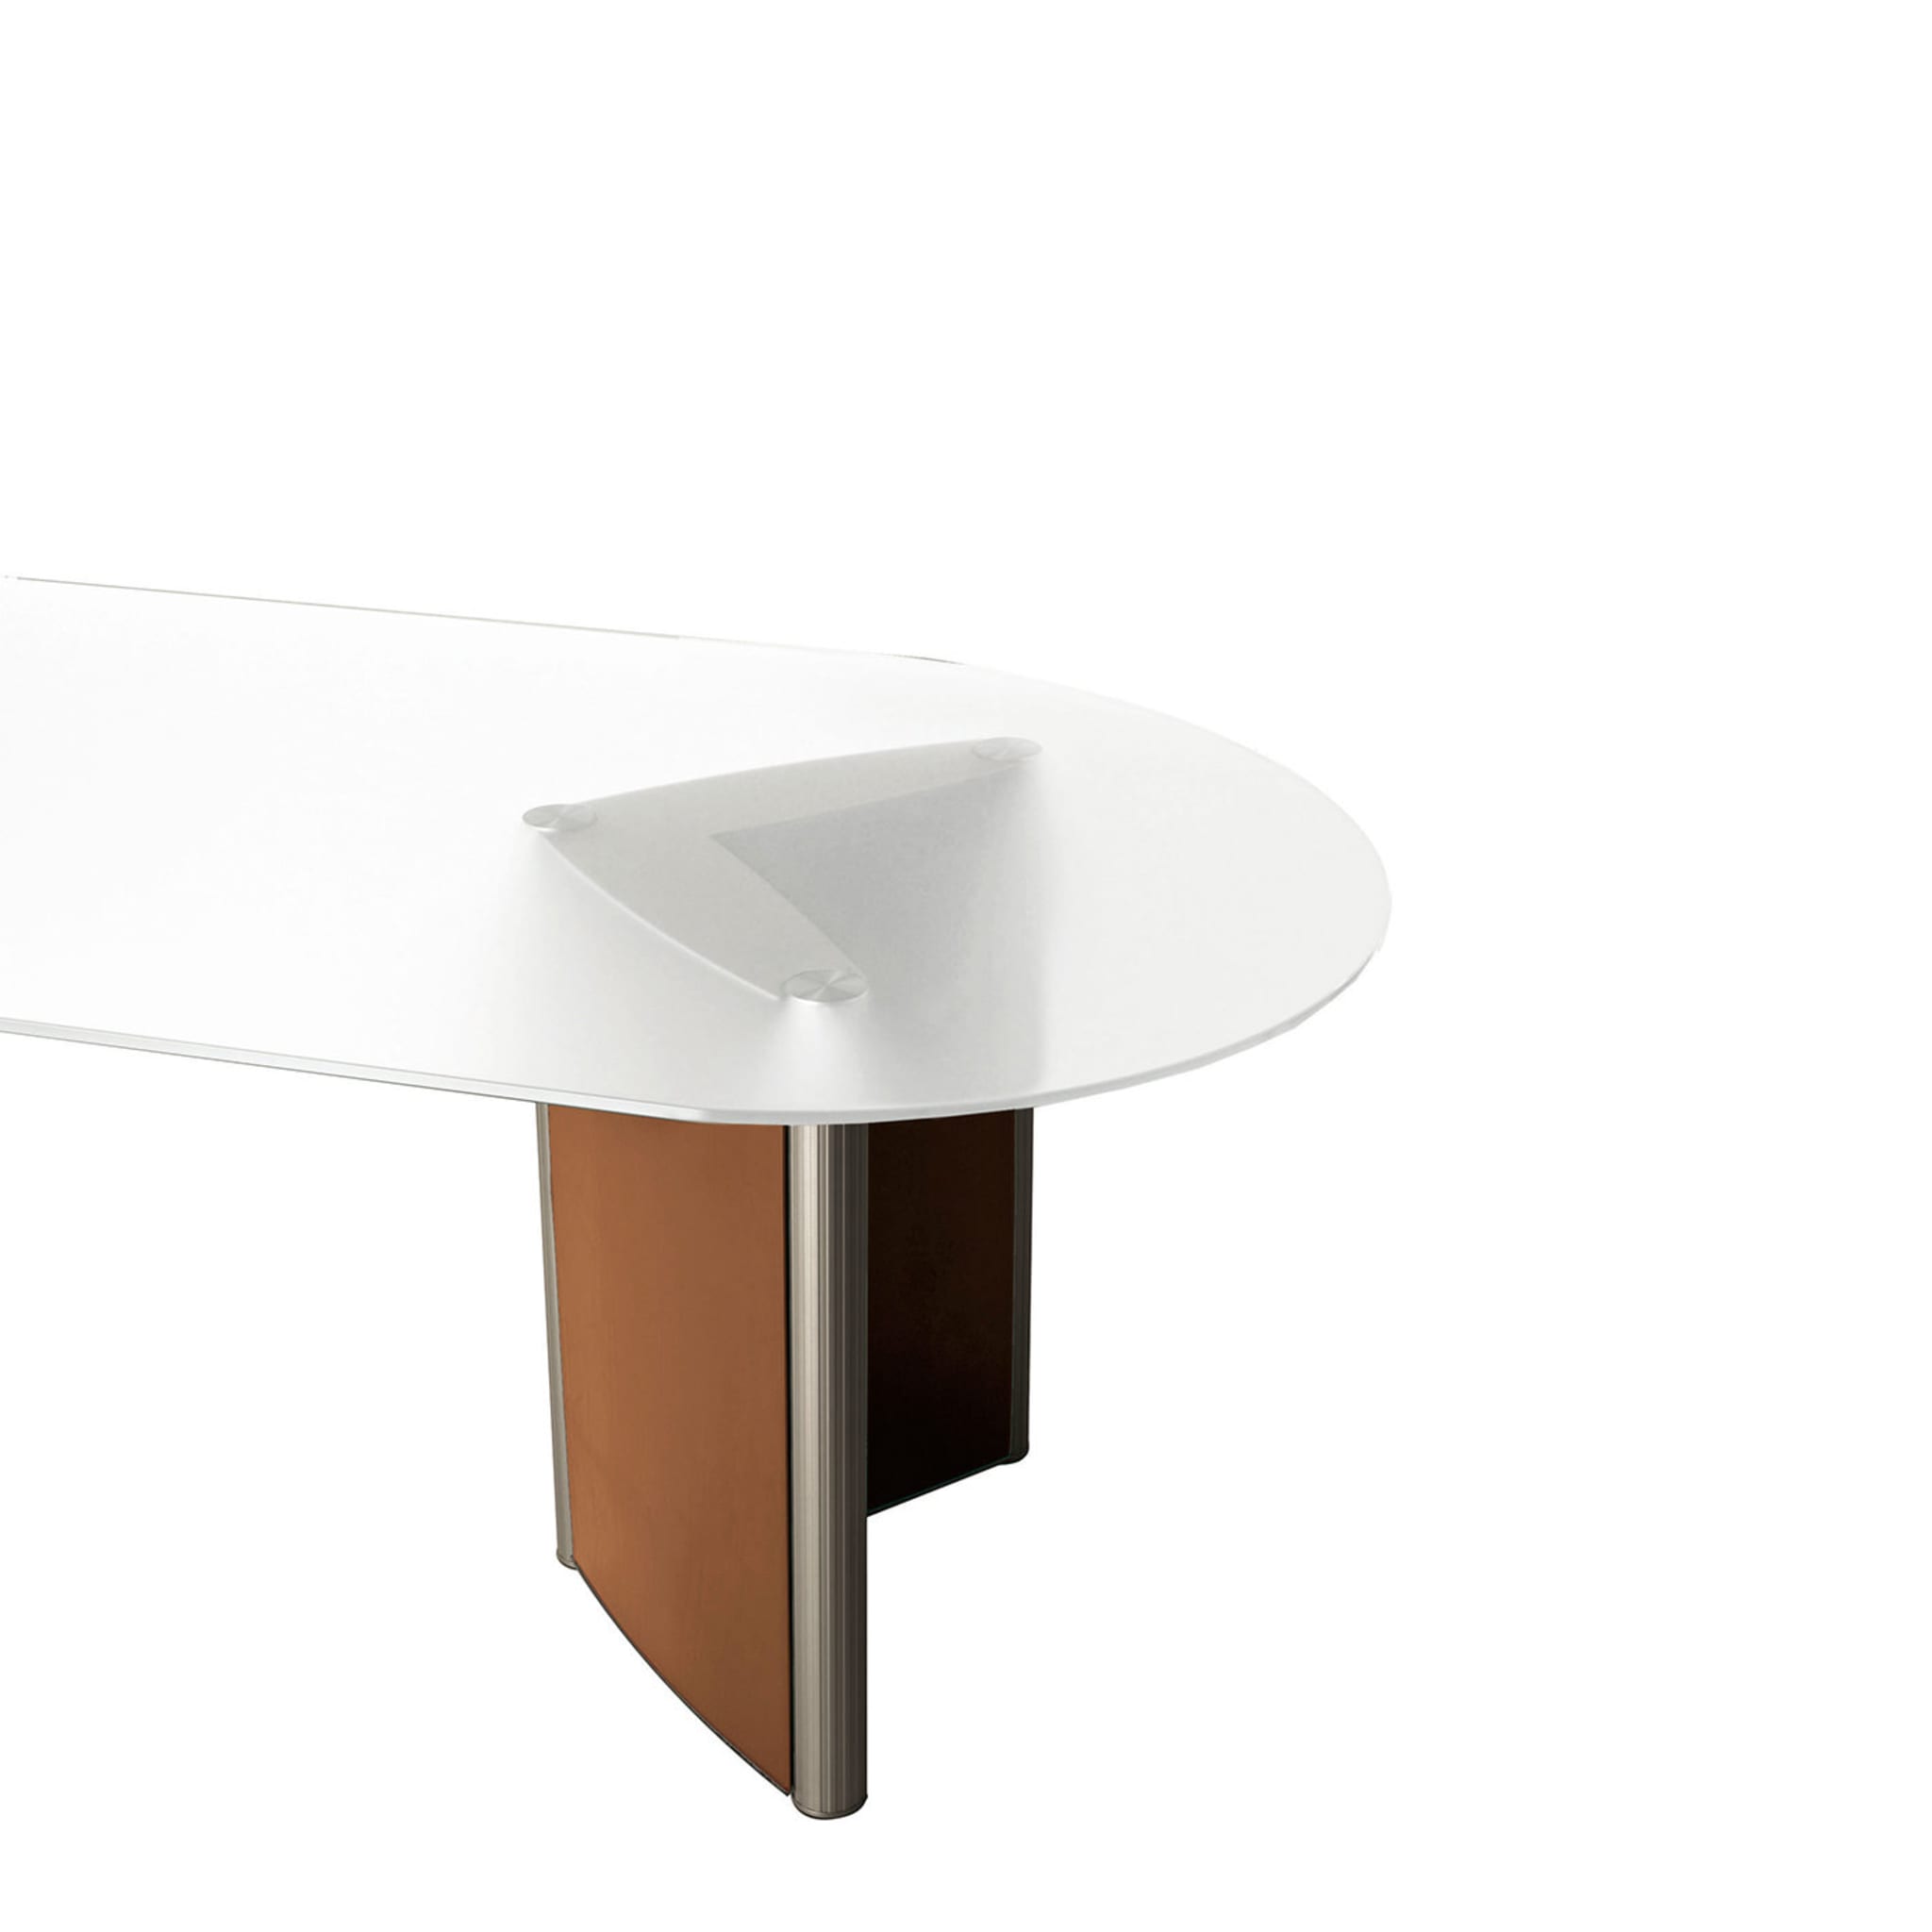 Valeo Meeting Table by Fauciglietti Engineering - Alternative view 2